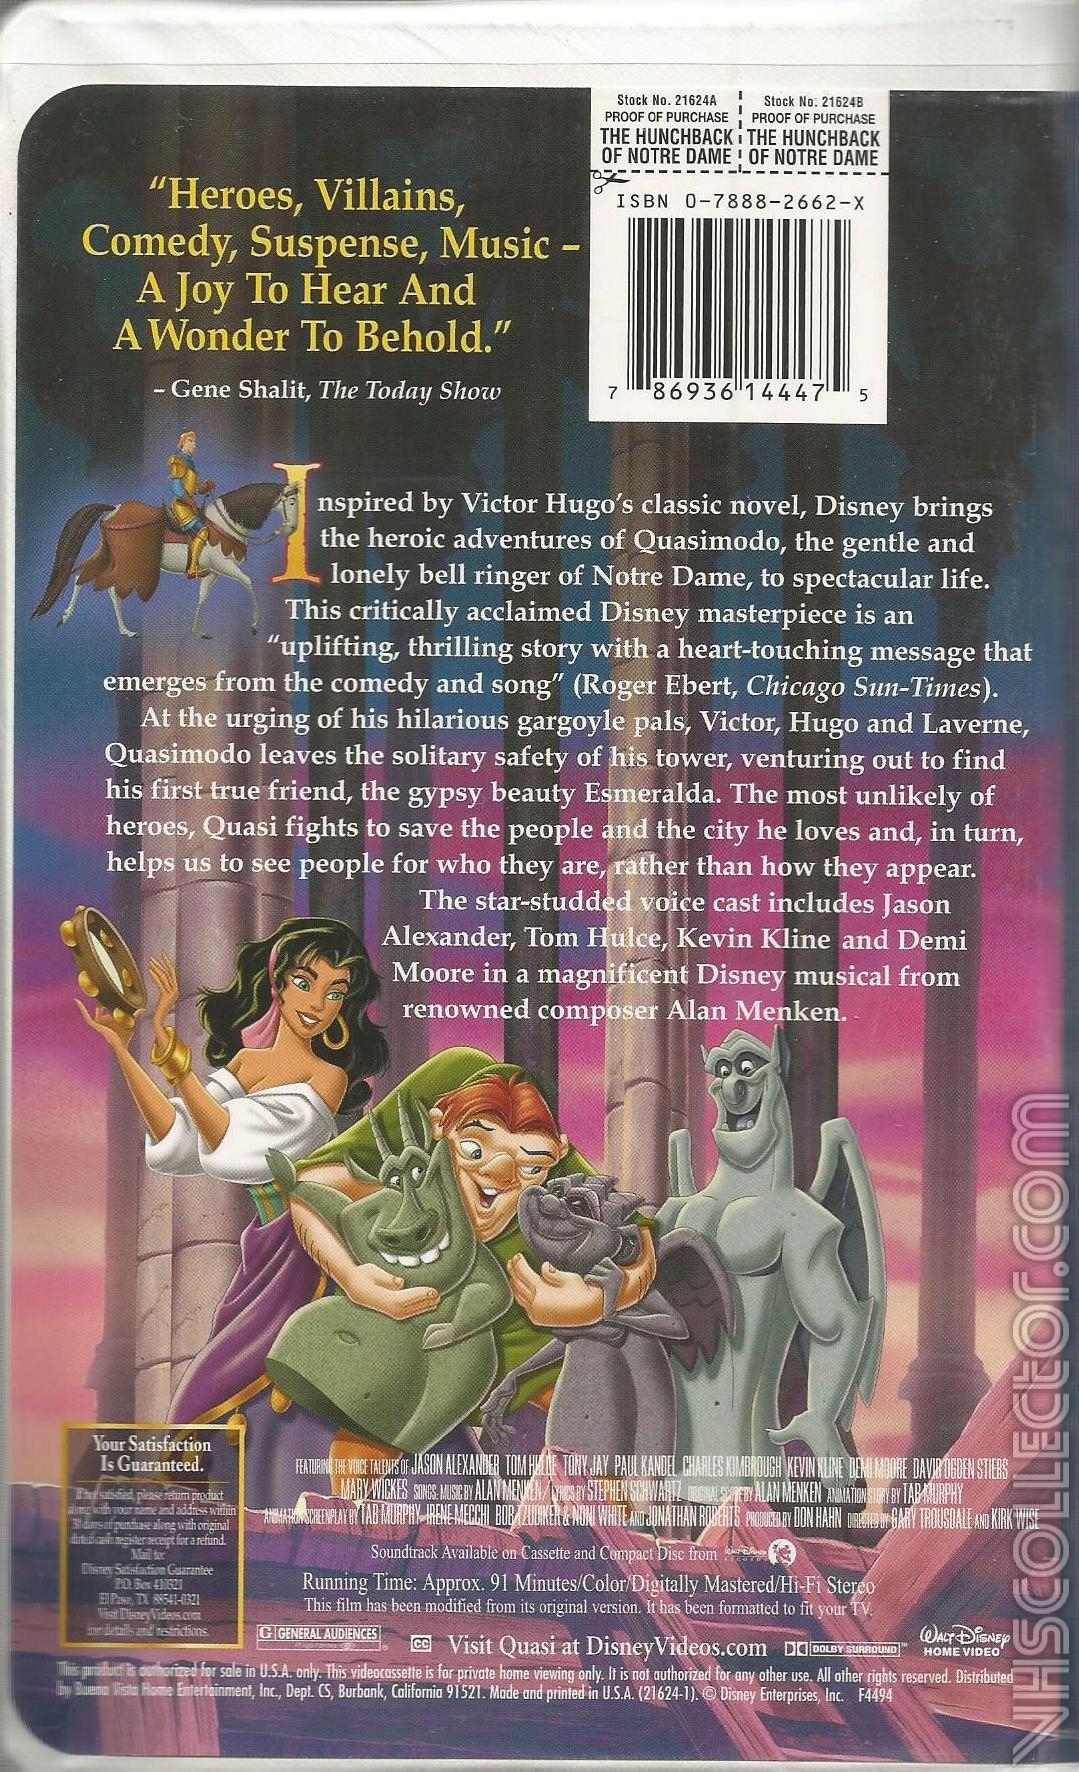 The Hunchback of Notre Dame | VHSCollector.com